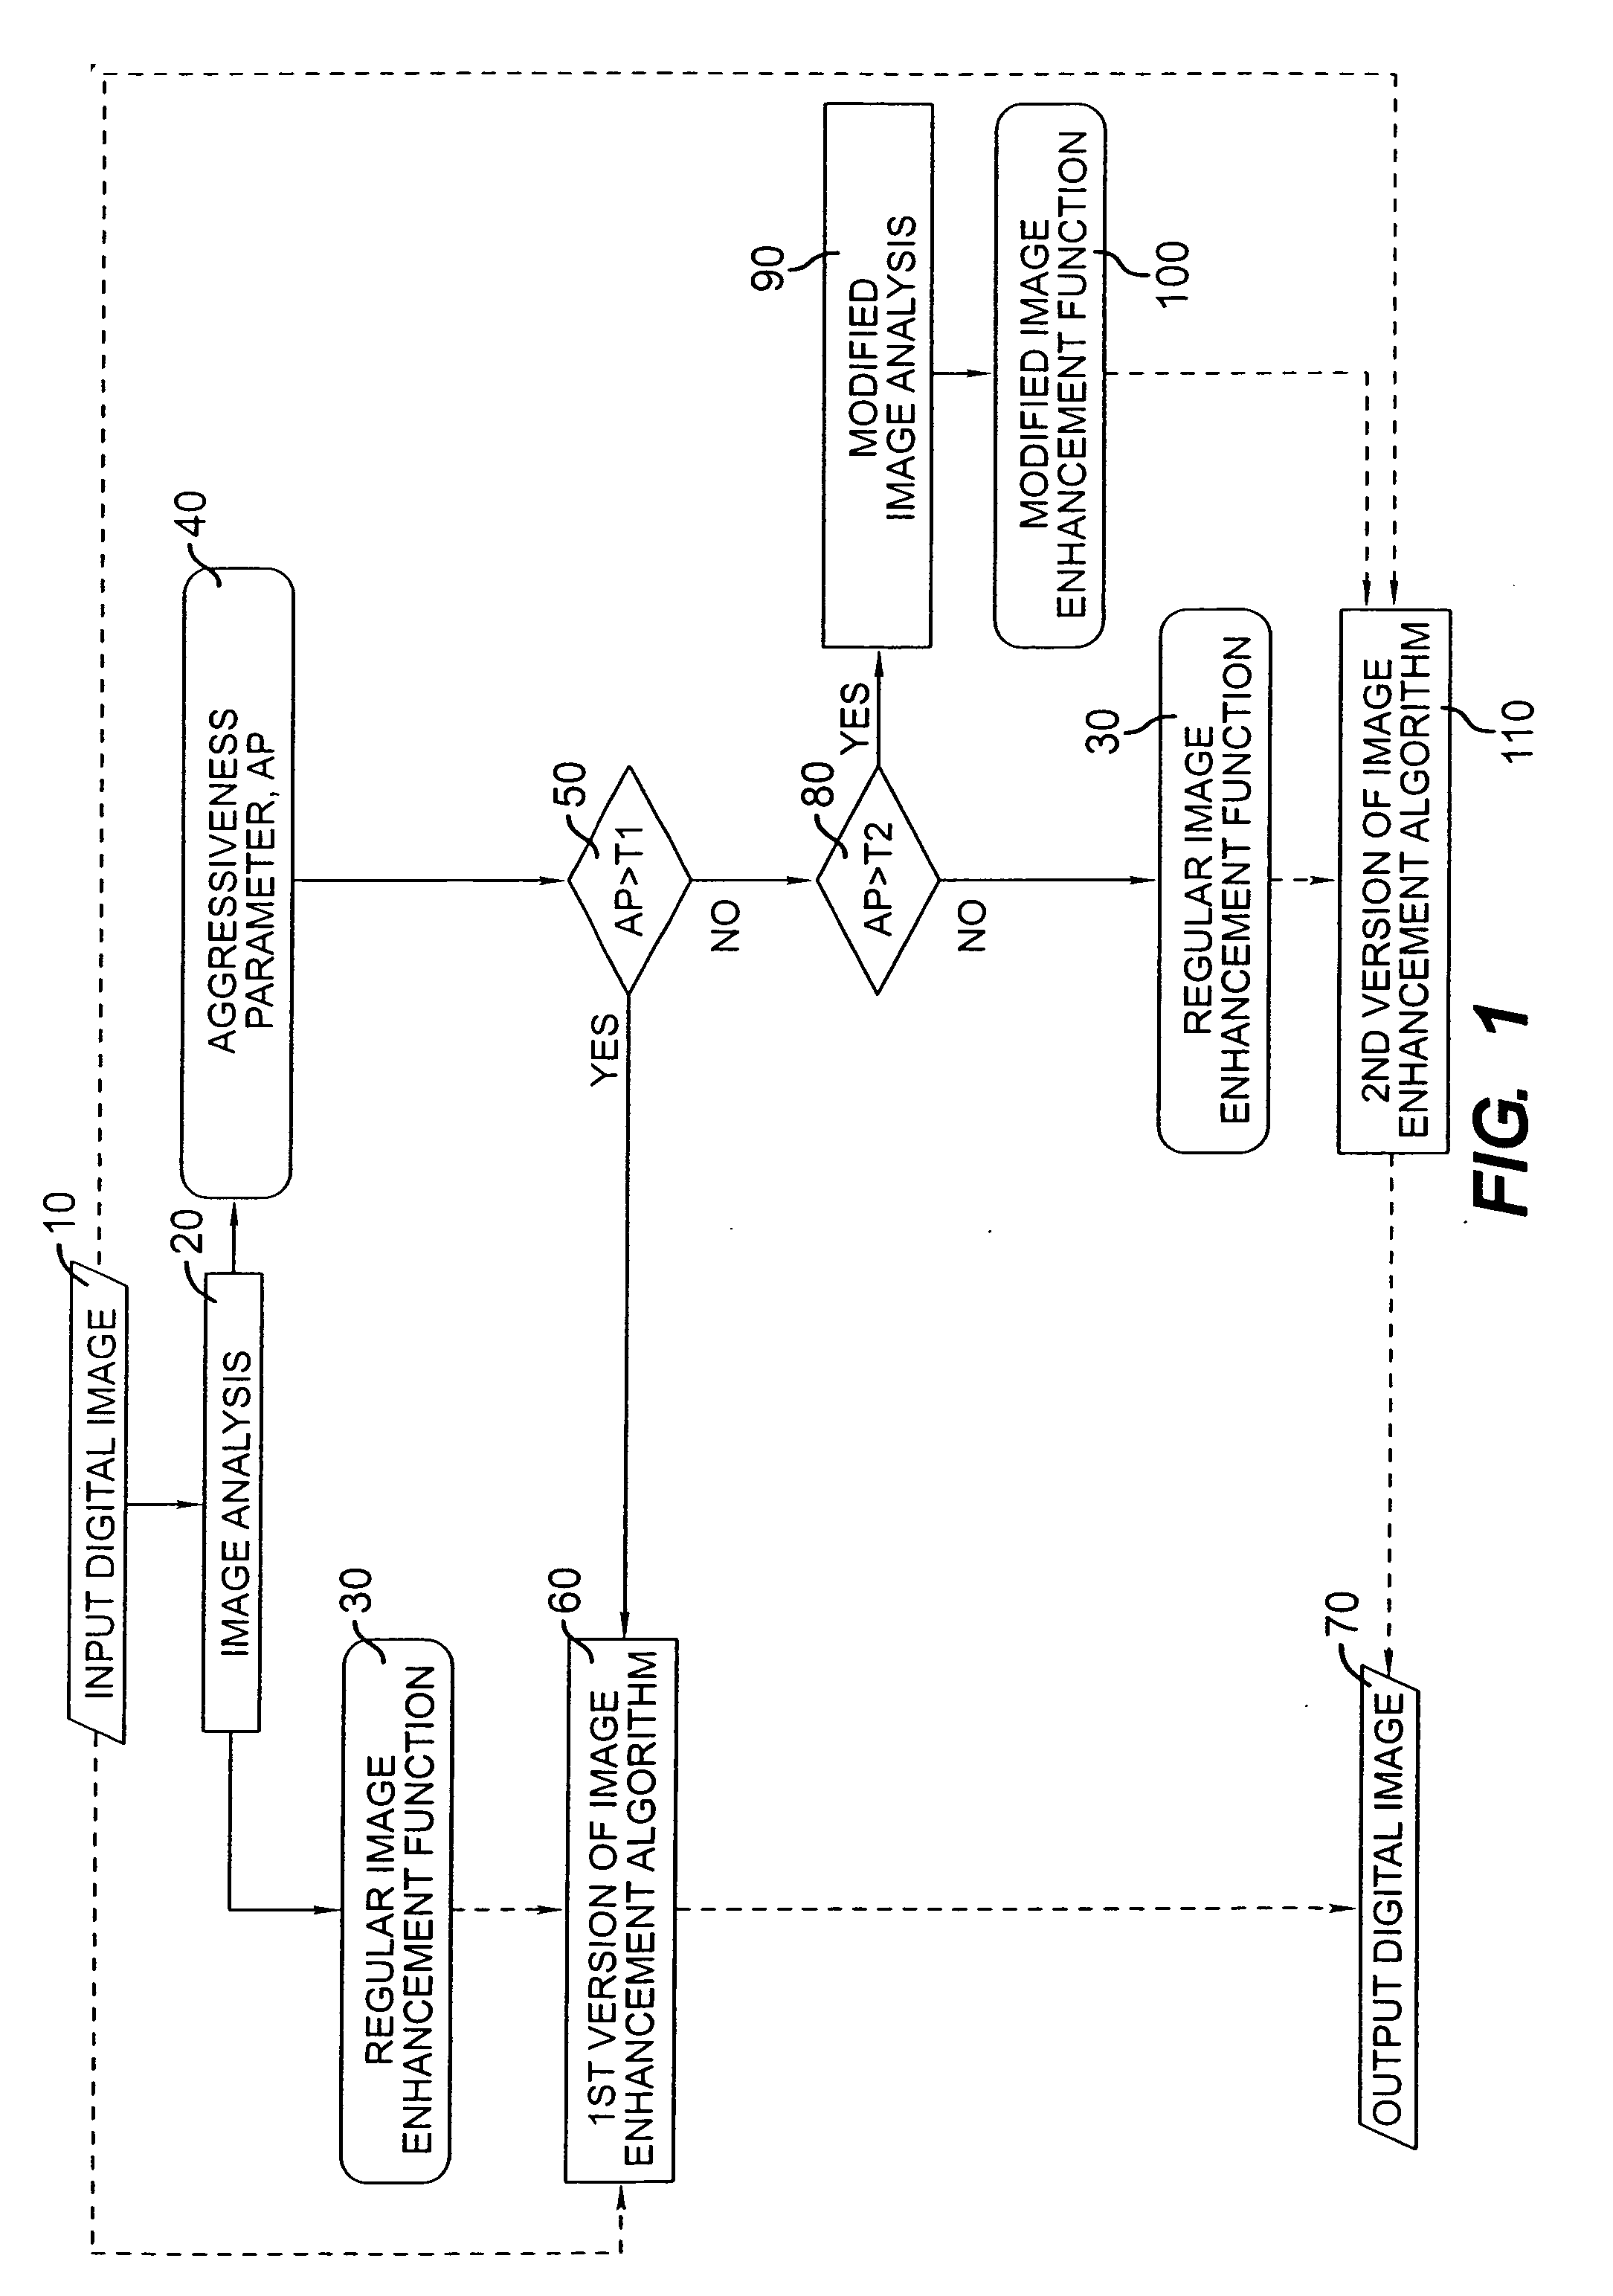 Selection of alternative image processing operations to maintain high image quality